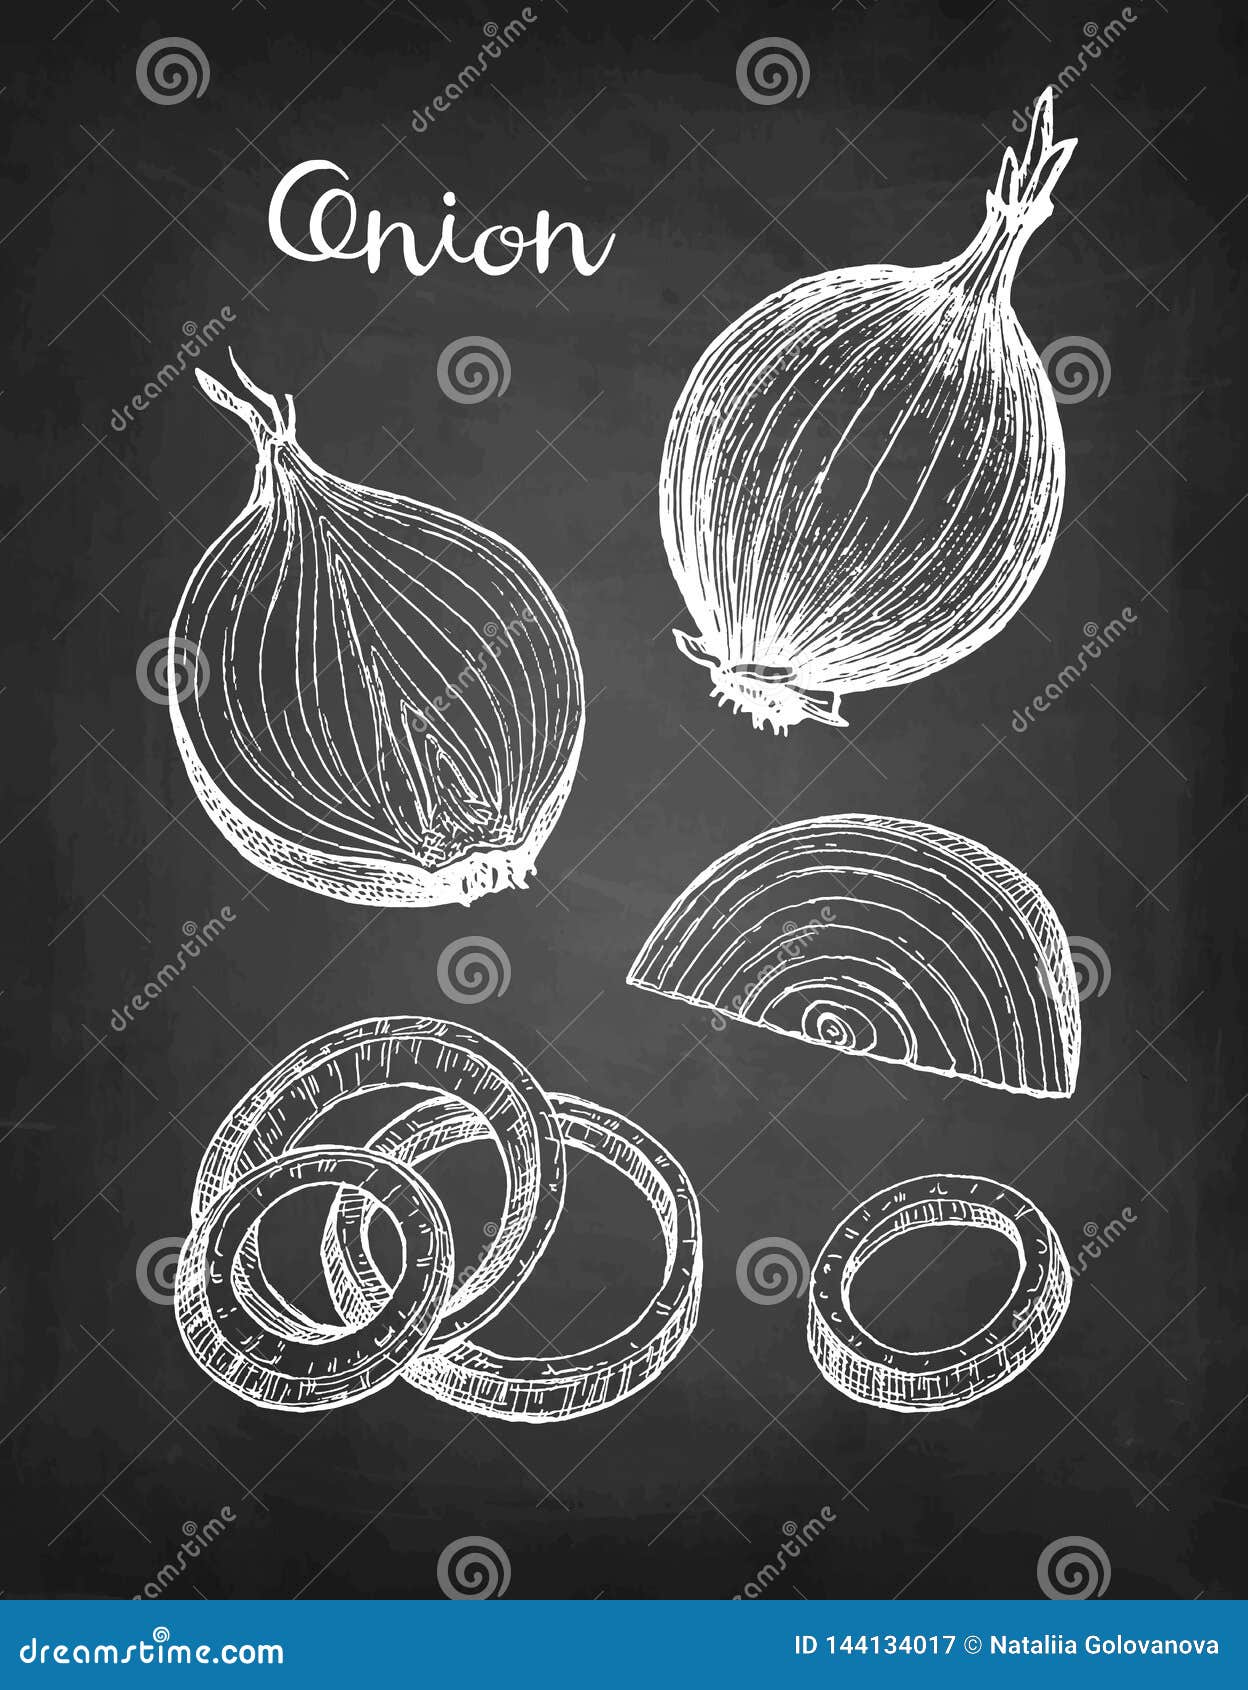 Onion drawing and colouring || How to draw onion and colour || - YouTube